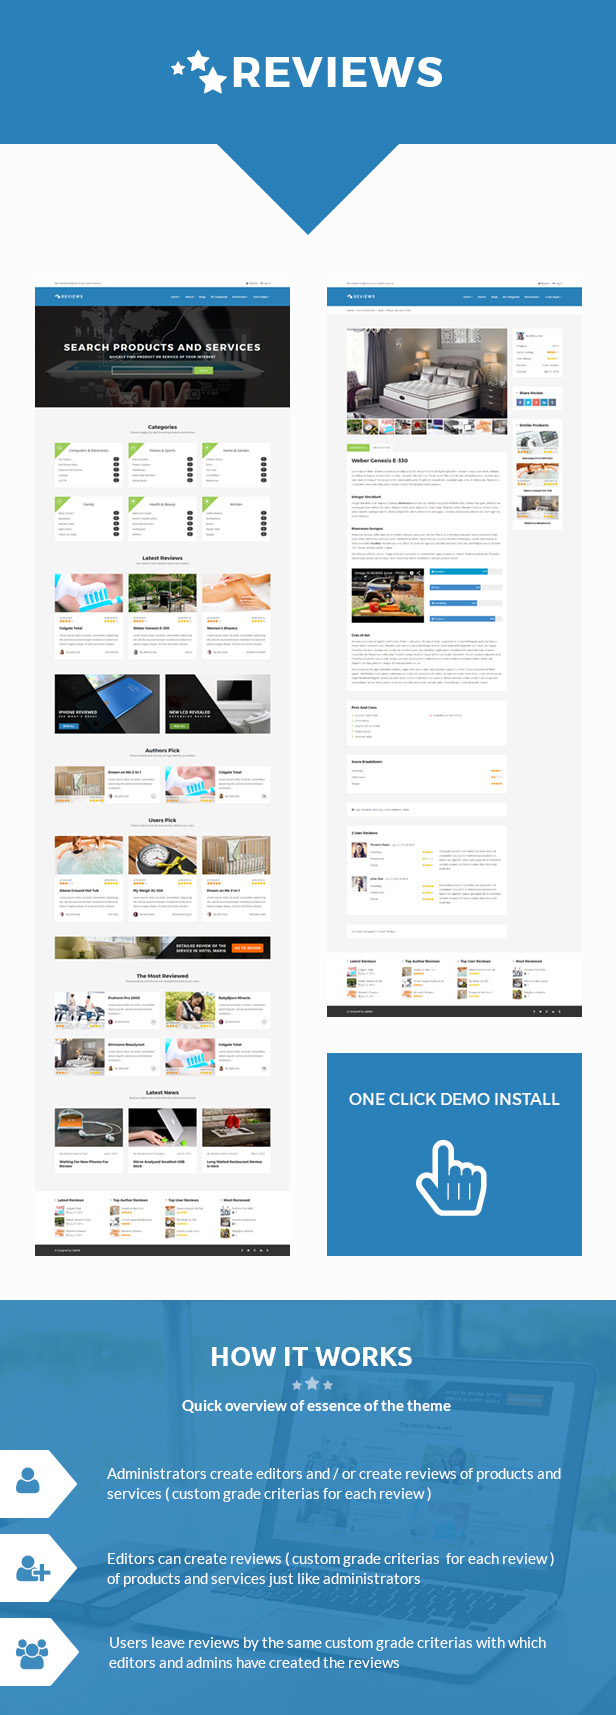 Reviews - Products And Services Review WP Theme - 2